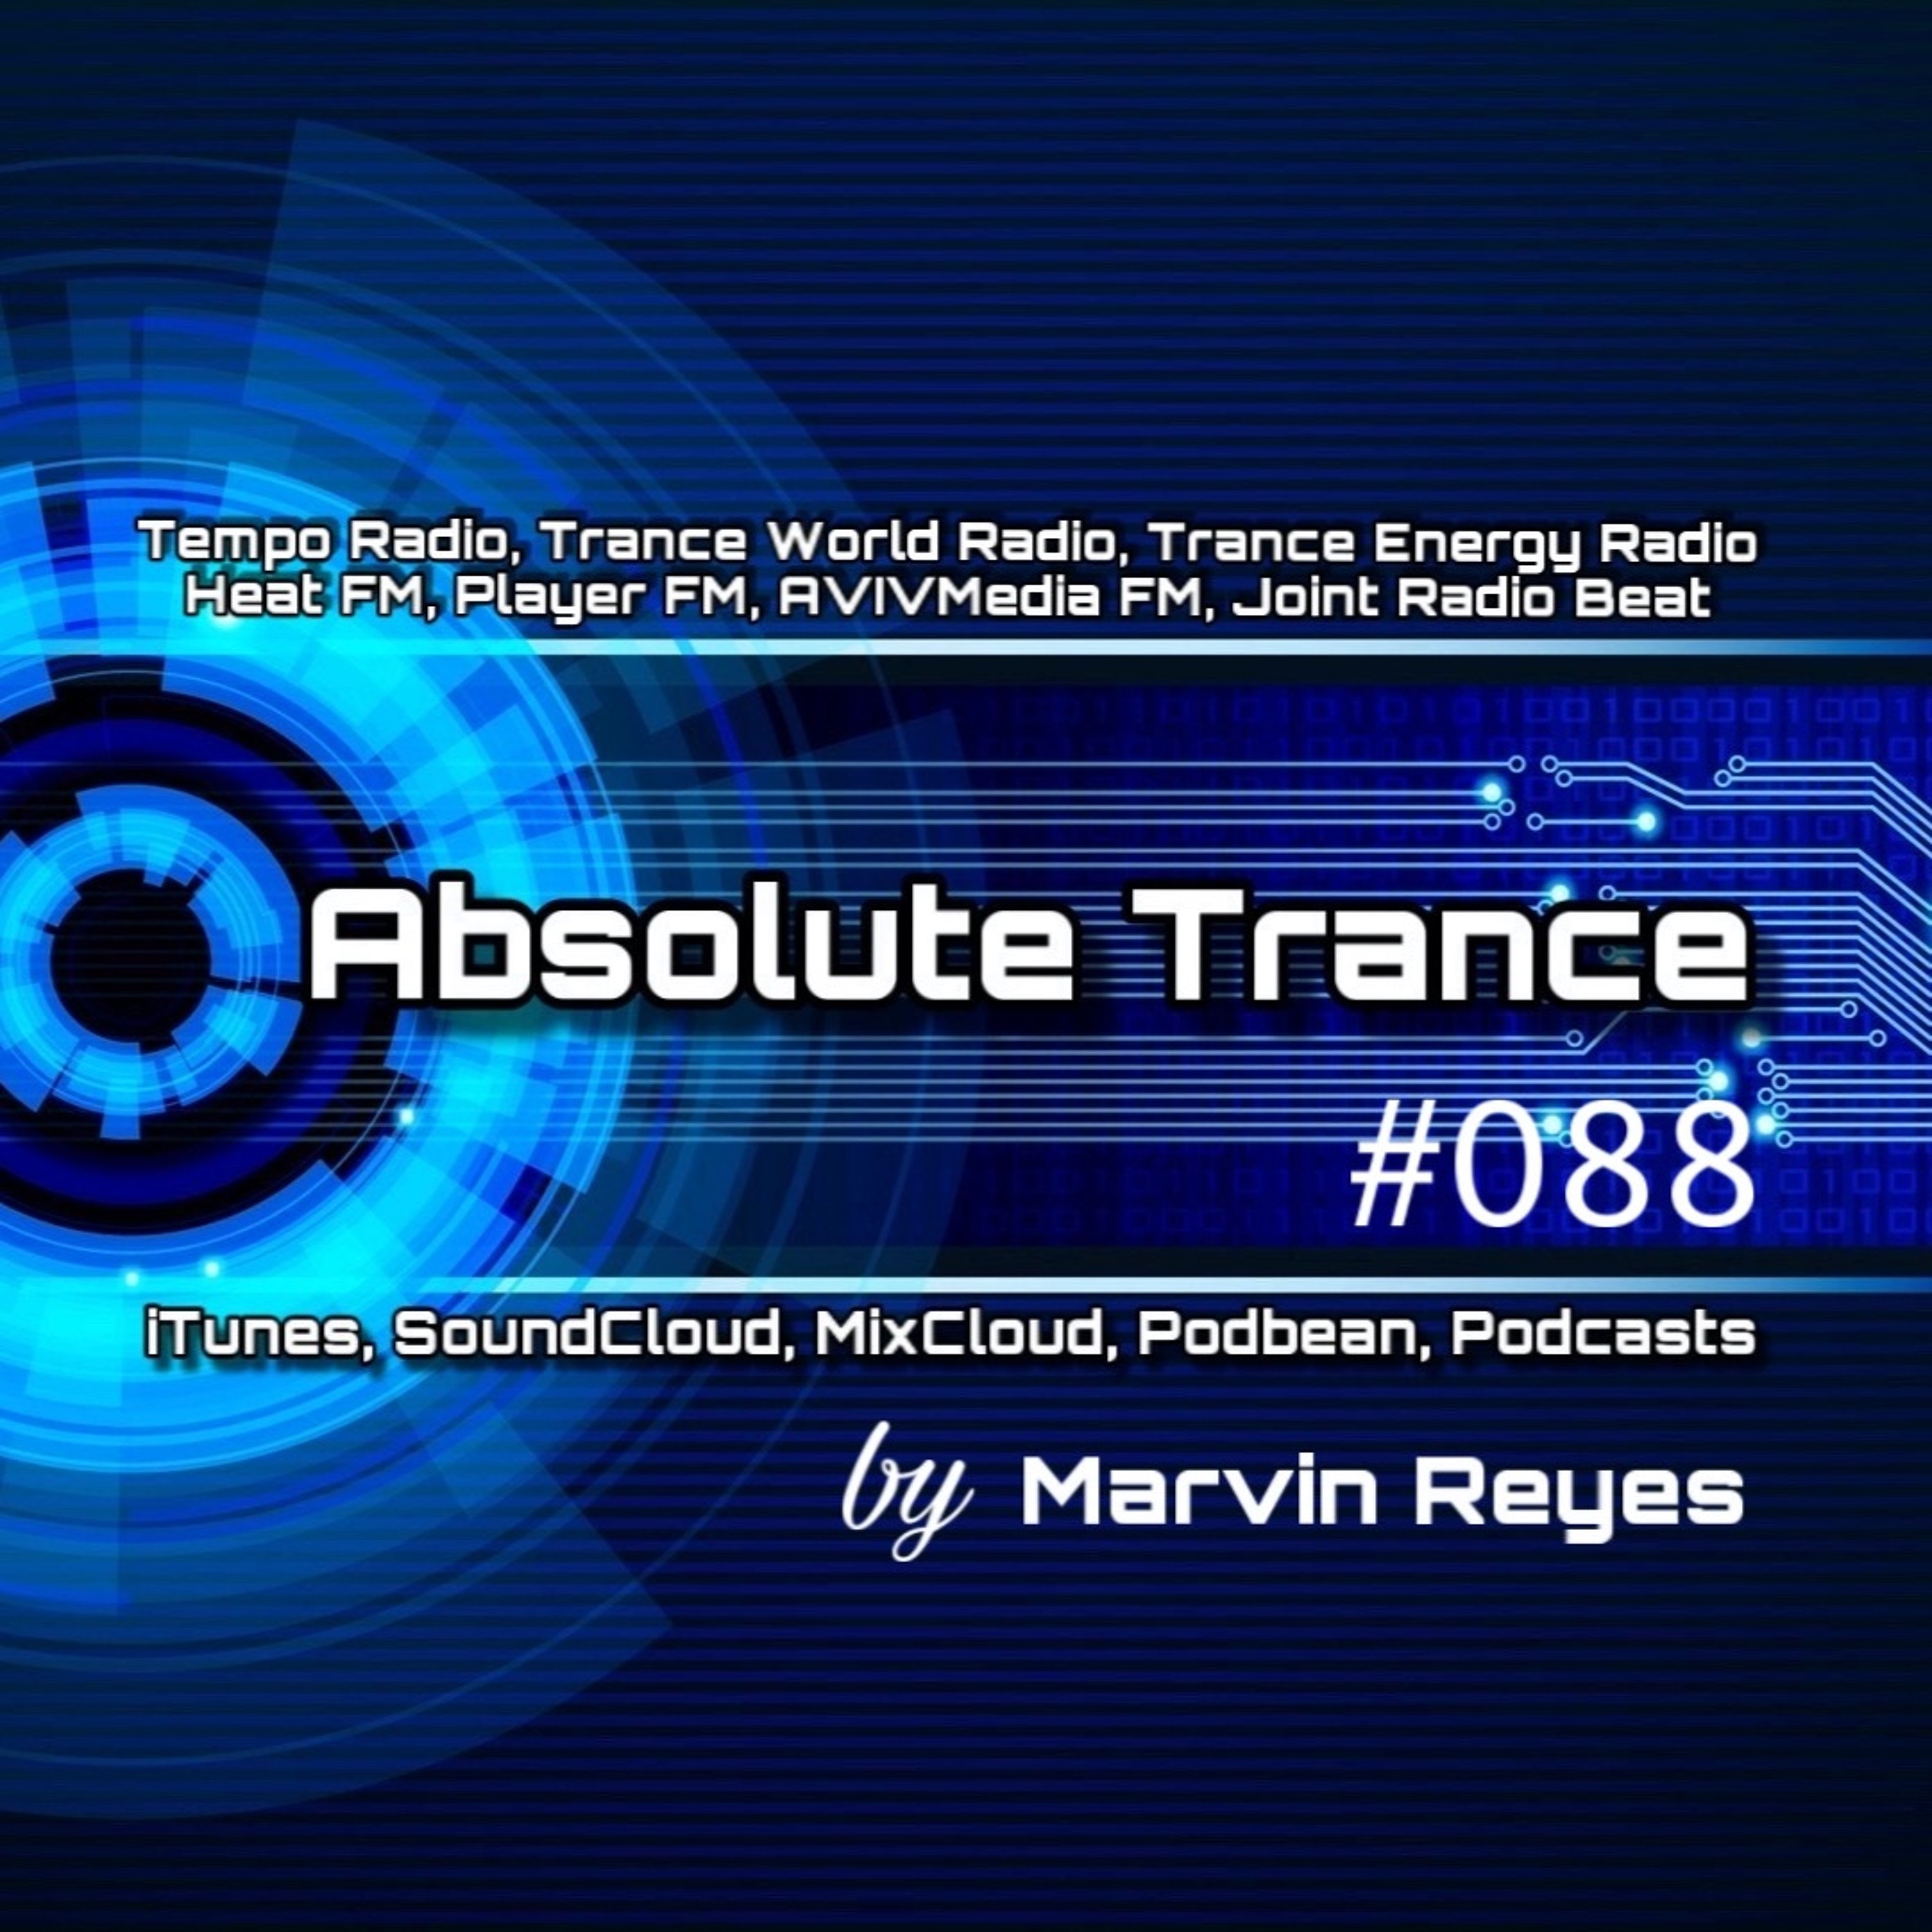 Absolute Trance #088